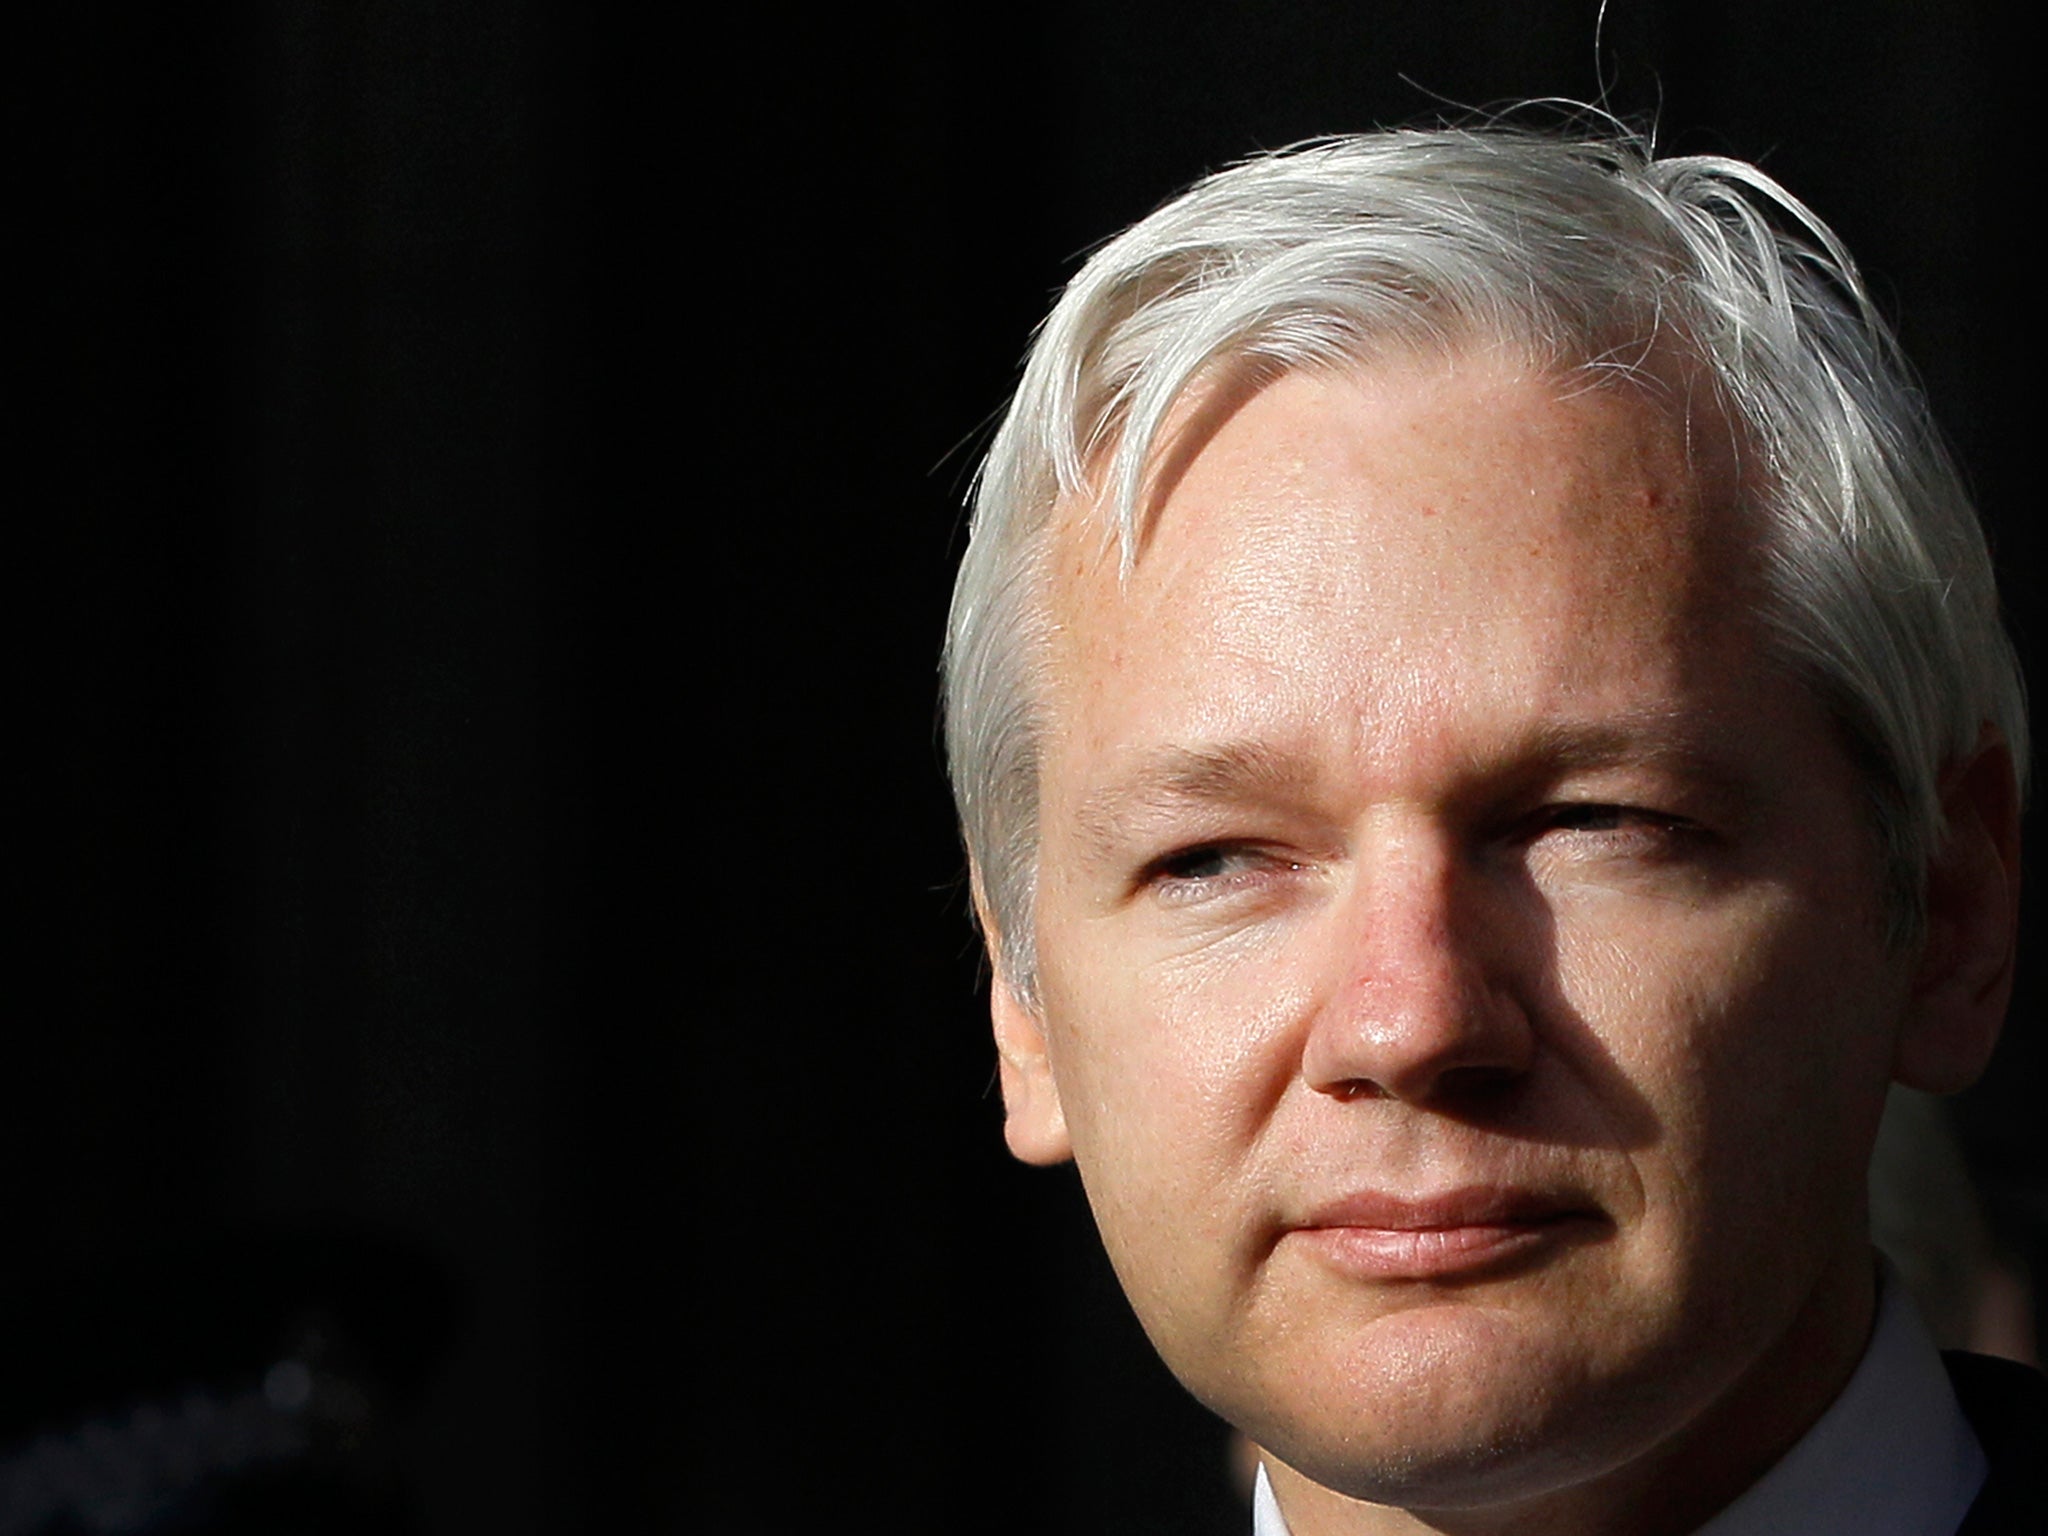 WikiLeaks founder Julian Assange faces extradition to the US over the leaks of classified documents.